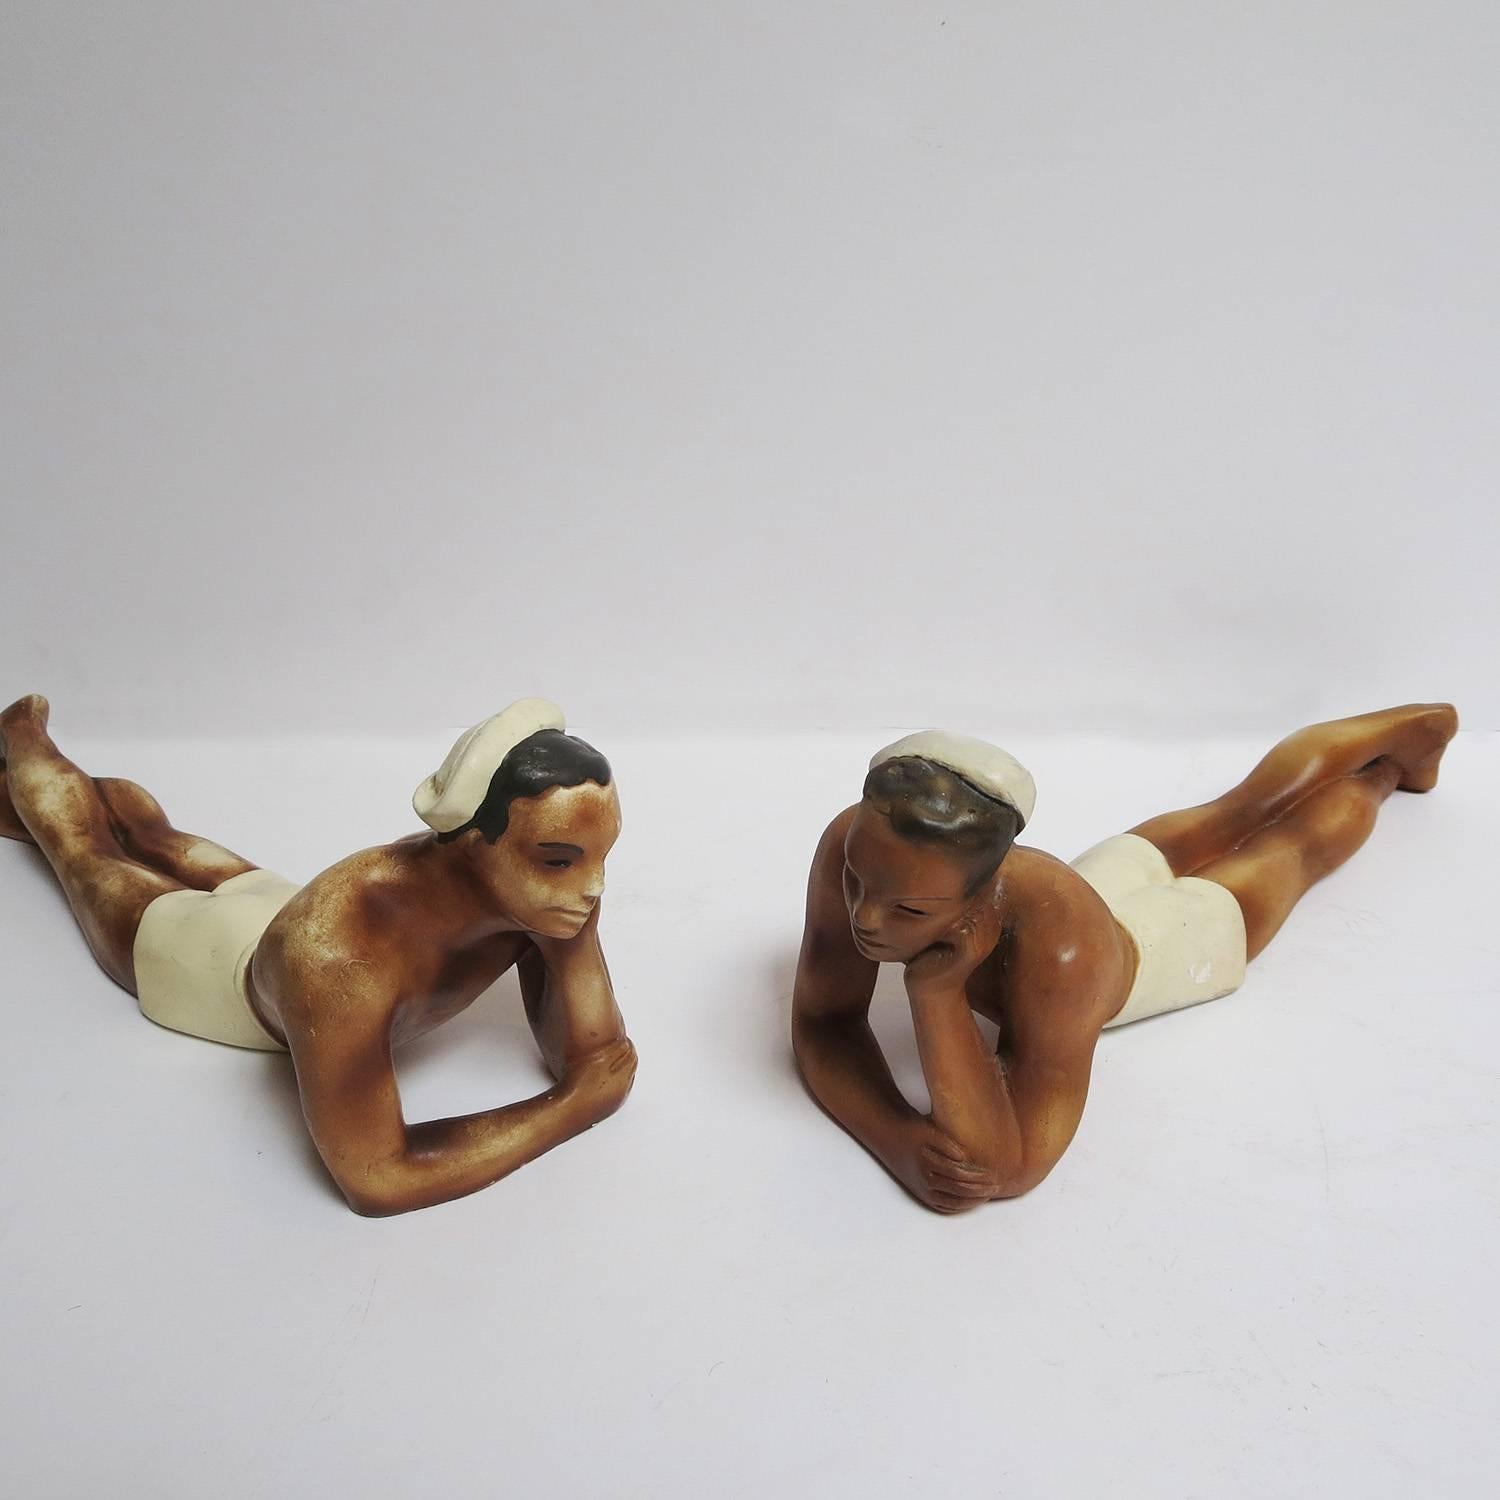 Hand-Painted 1950s Painted Chalkware Shirtless Sailors